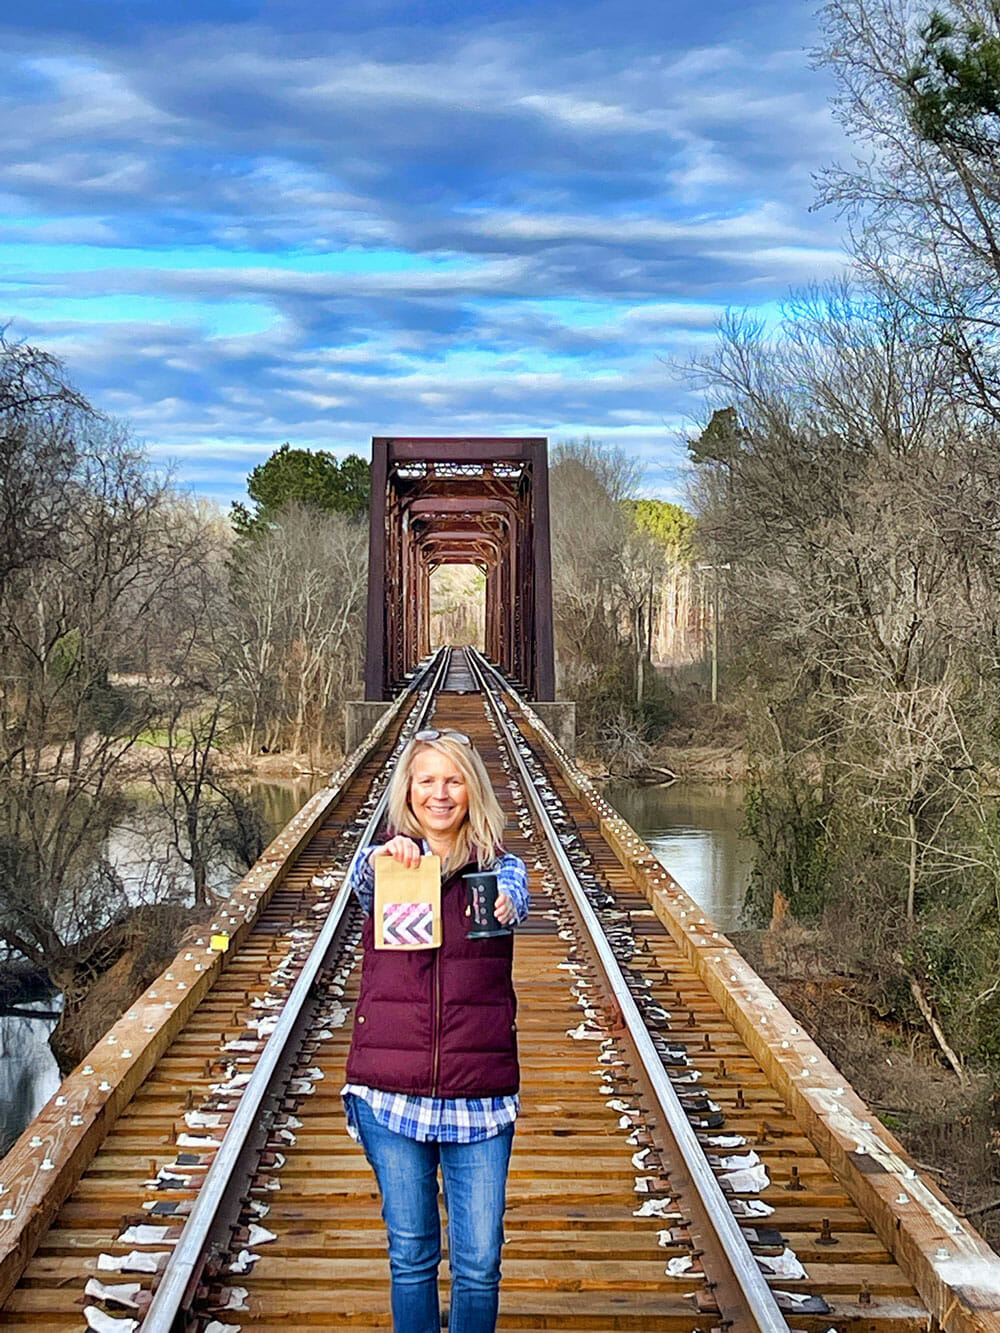 Someone standing in the middle of train track holding out a bag of coffee beans and a cup of coffee. They appear to be surrounded by nature.